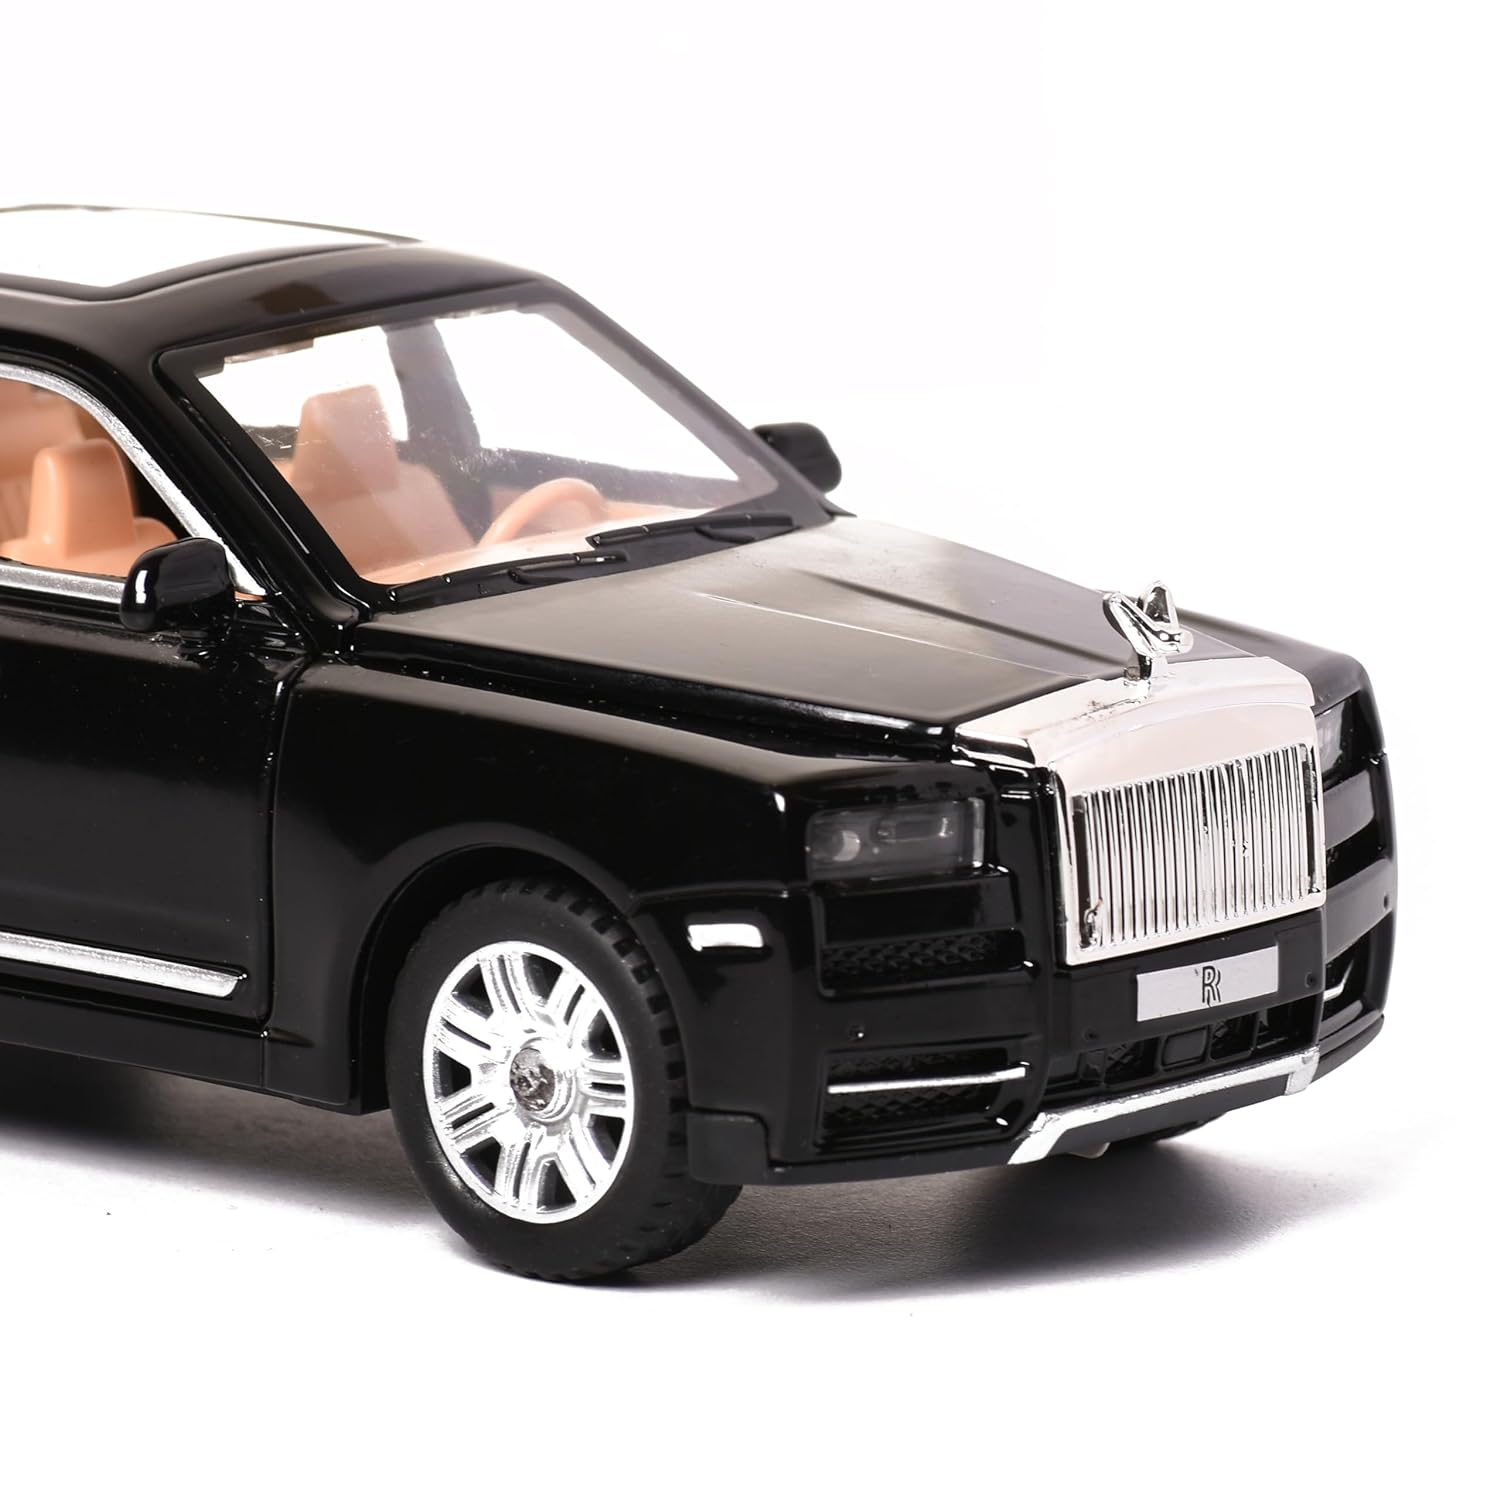 Braintastic Model Diecast Car Toy Vehicle Pull Back Friction Car with Openable Doors Light & Music Toys for Kids Age 3+ Years (Rolls Royce Black)